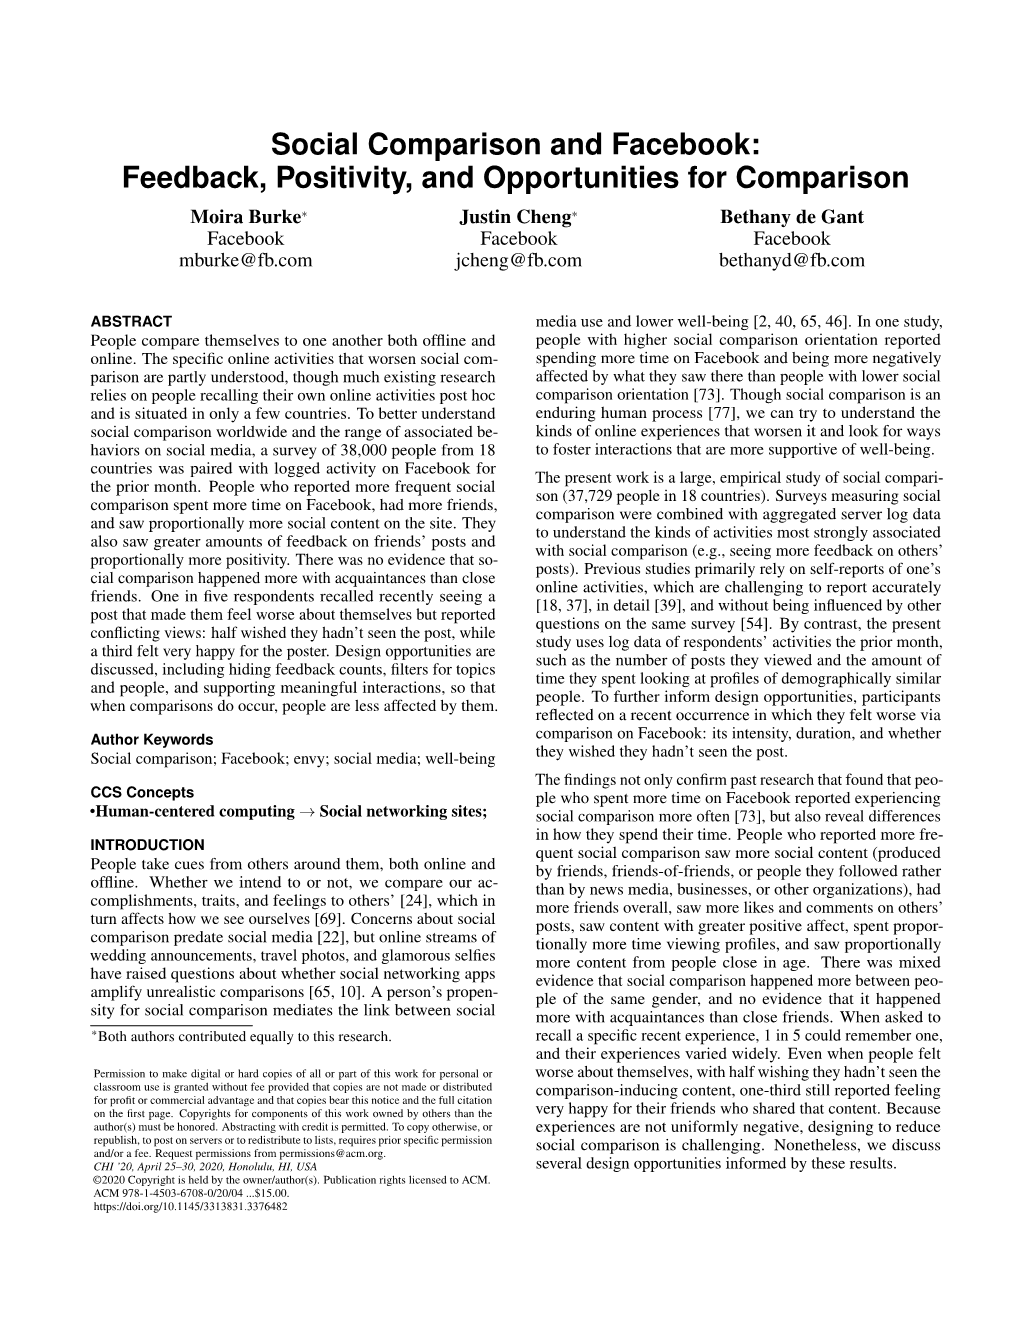 Social Comparison and Facebook:Feedback, Positivity, and Opportunities for Comparison